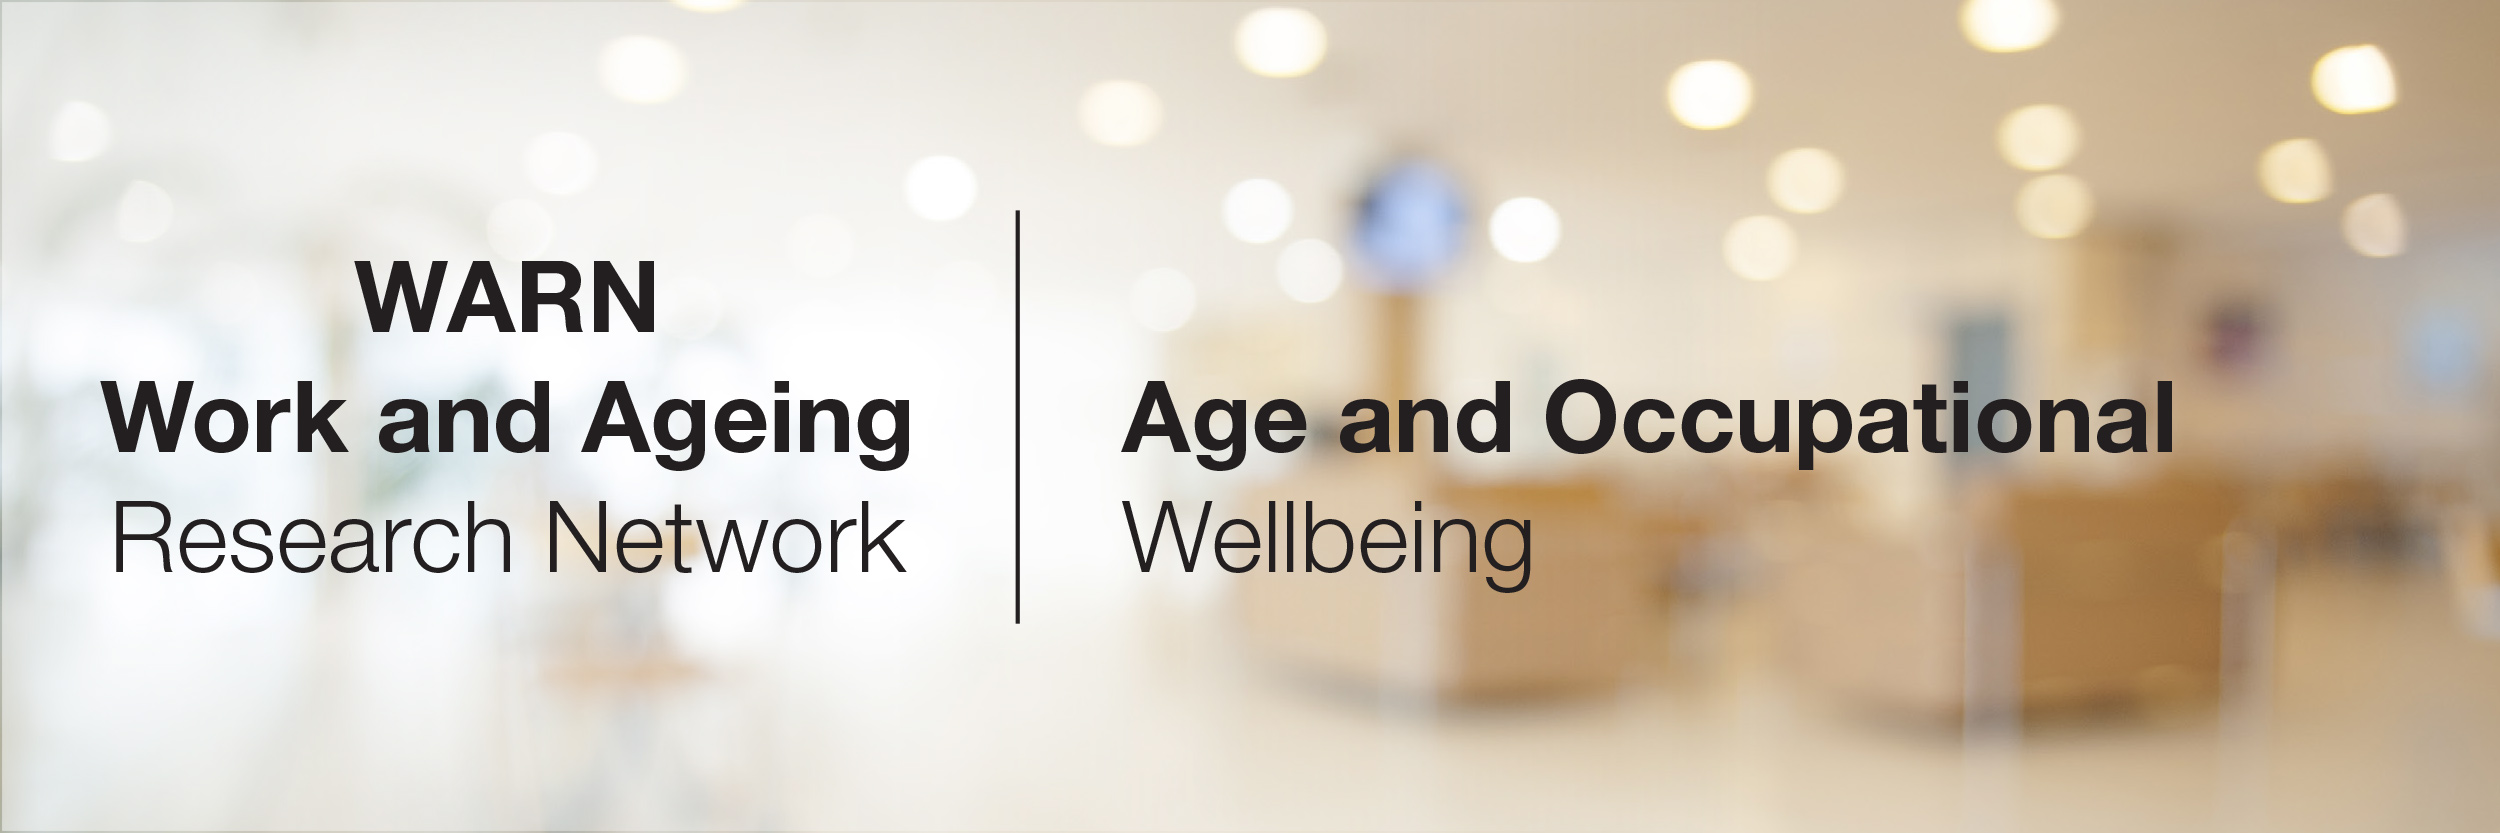 Age and occupational wellbeing